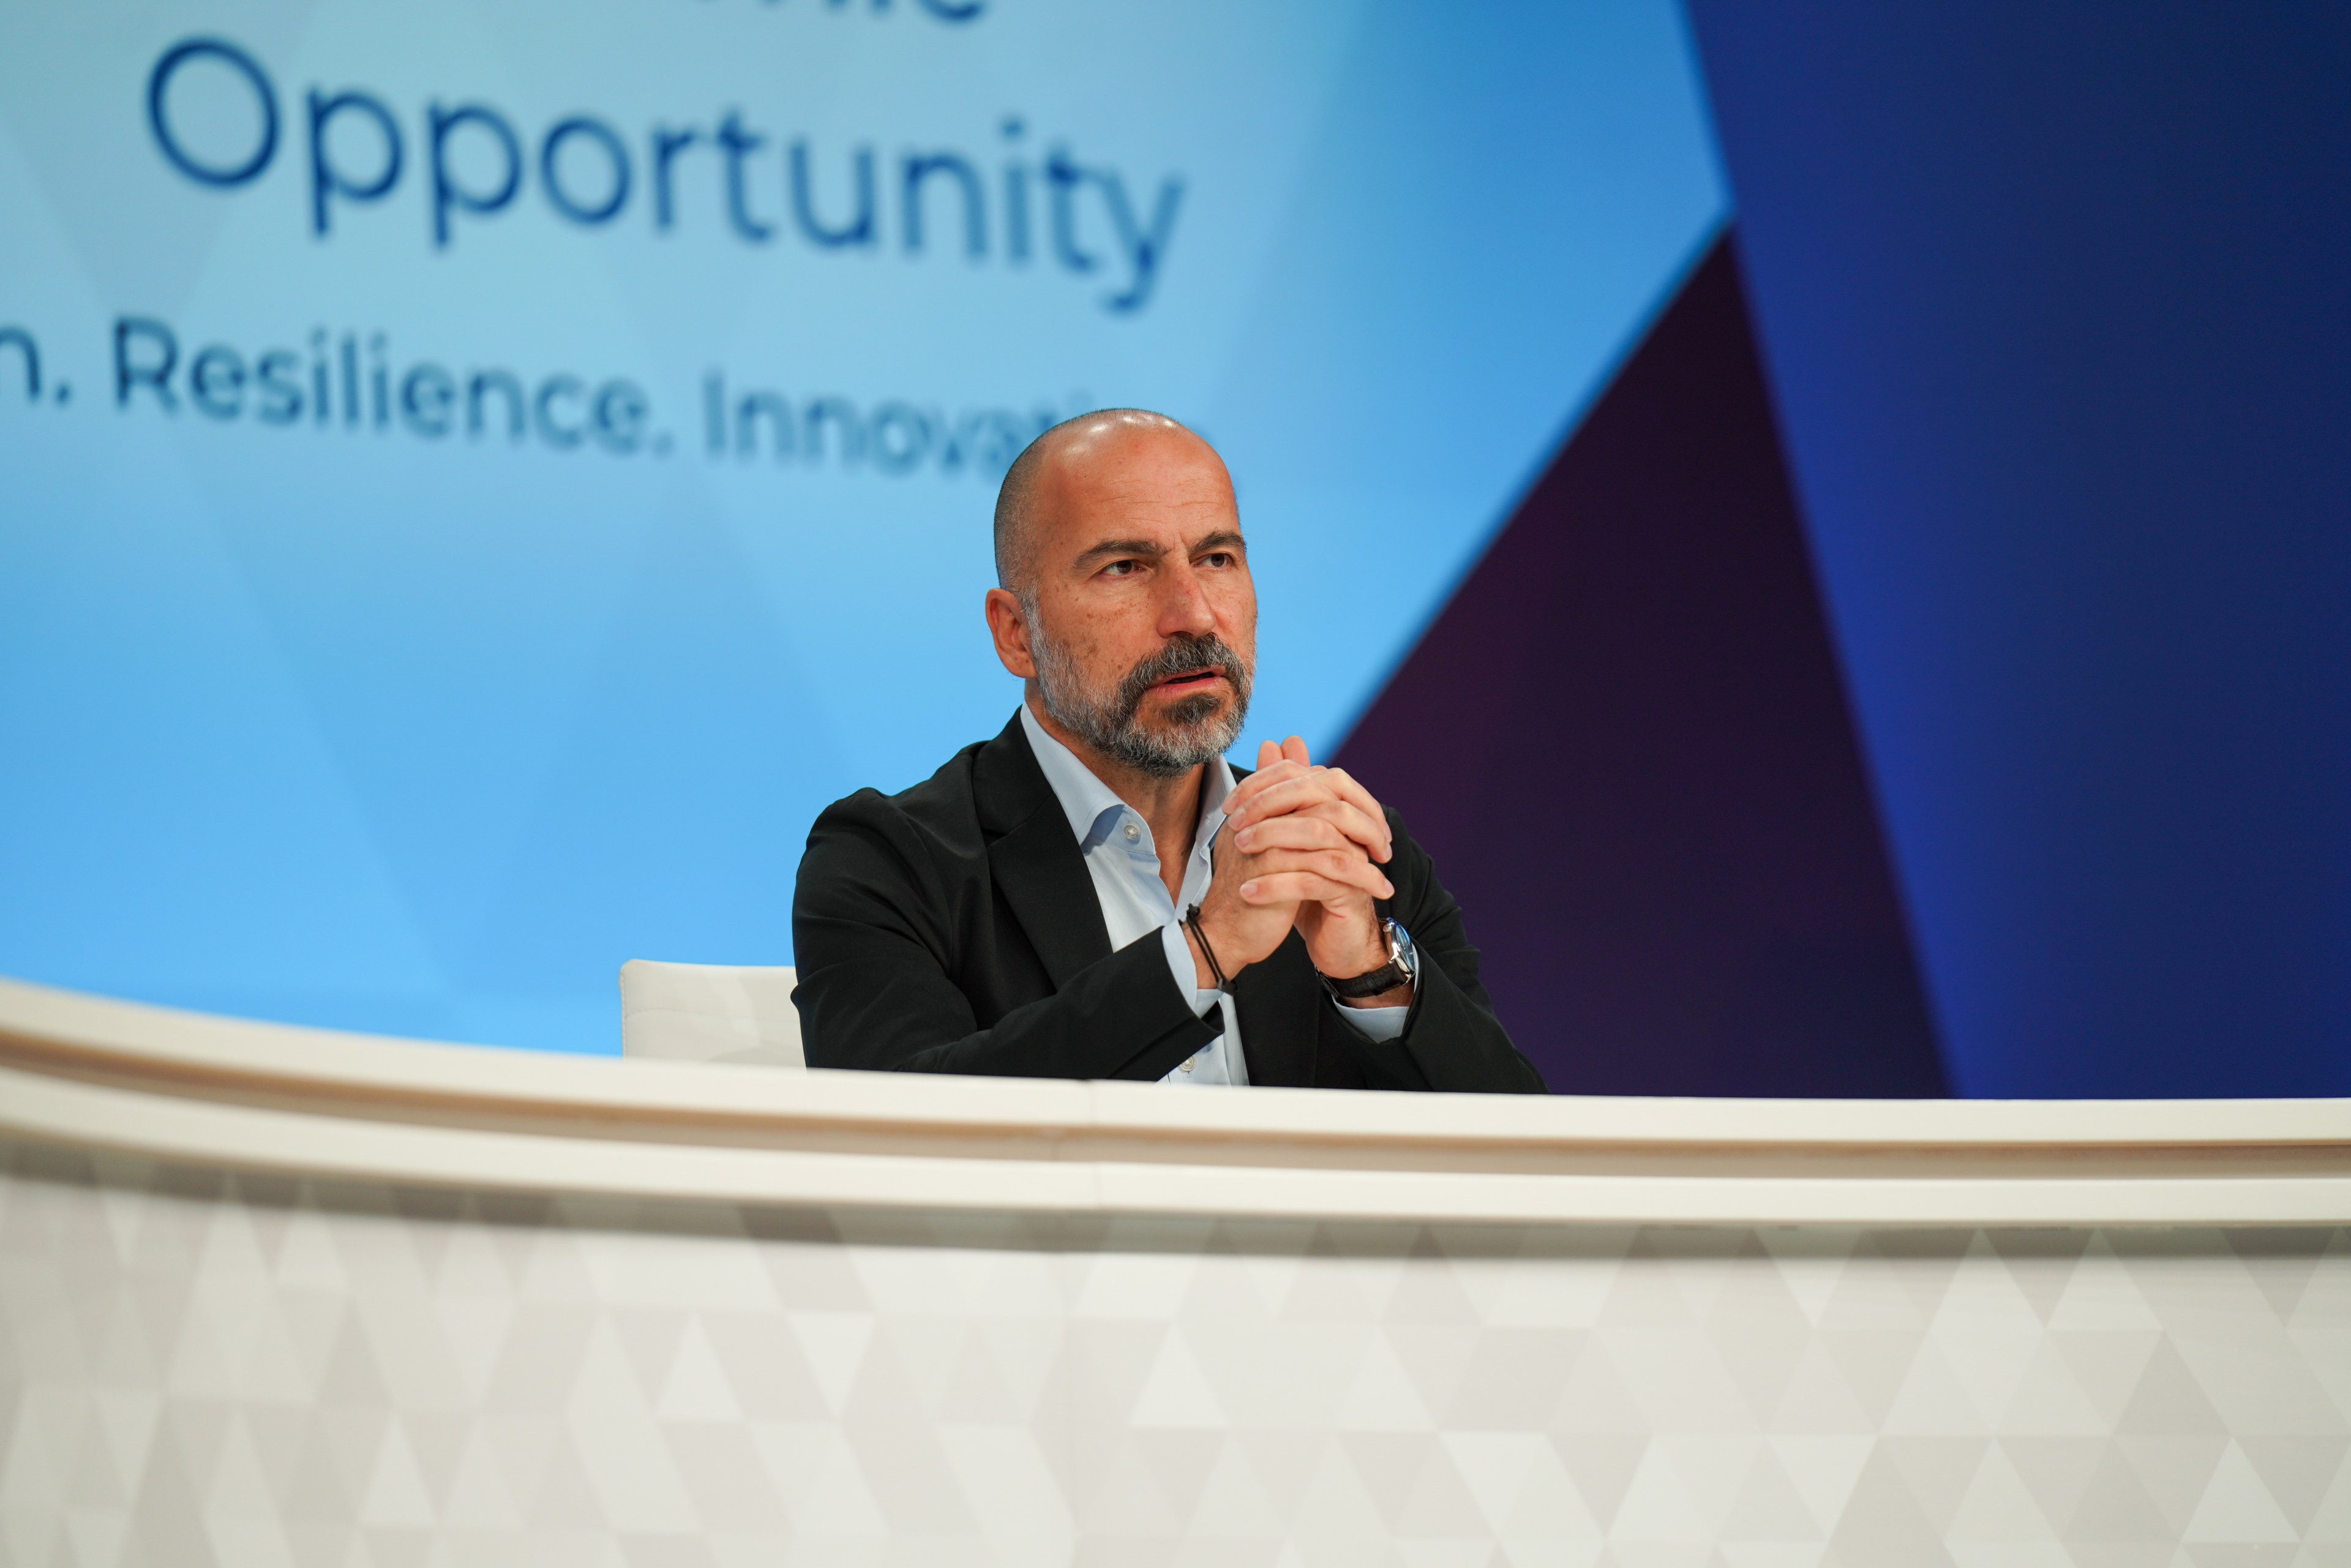 Uber CEO Dara Khosrowshahi is seated at a table while speaking at the APEC CEO Summit in San Francisco.